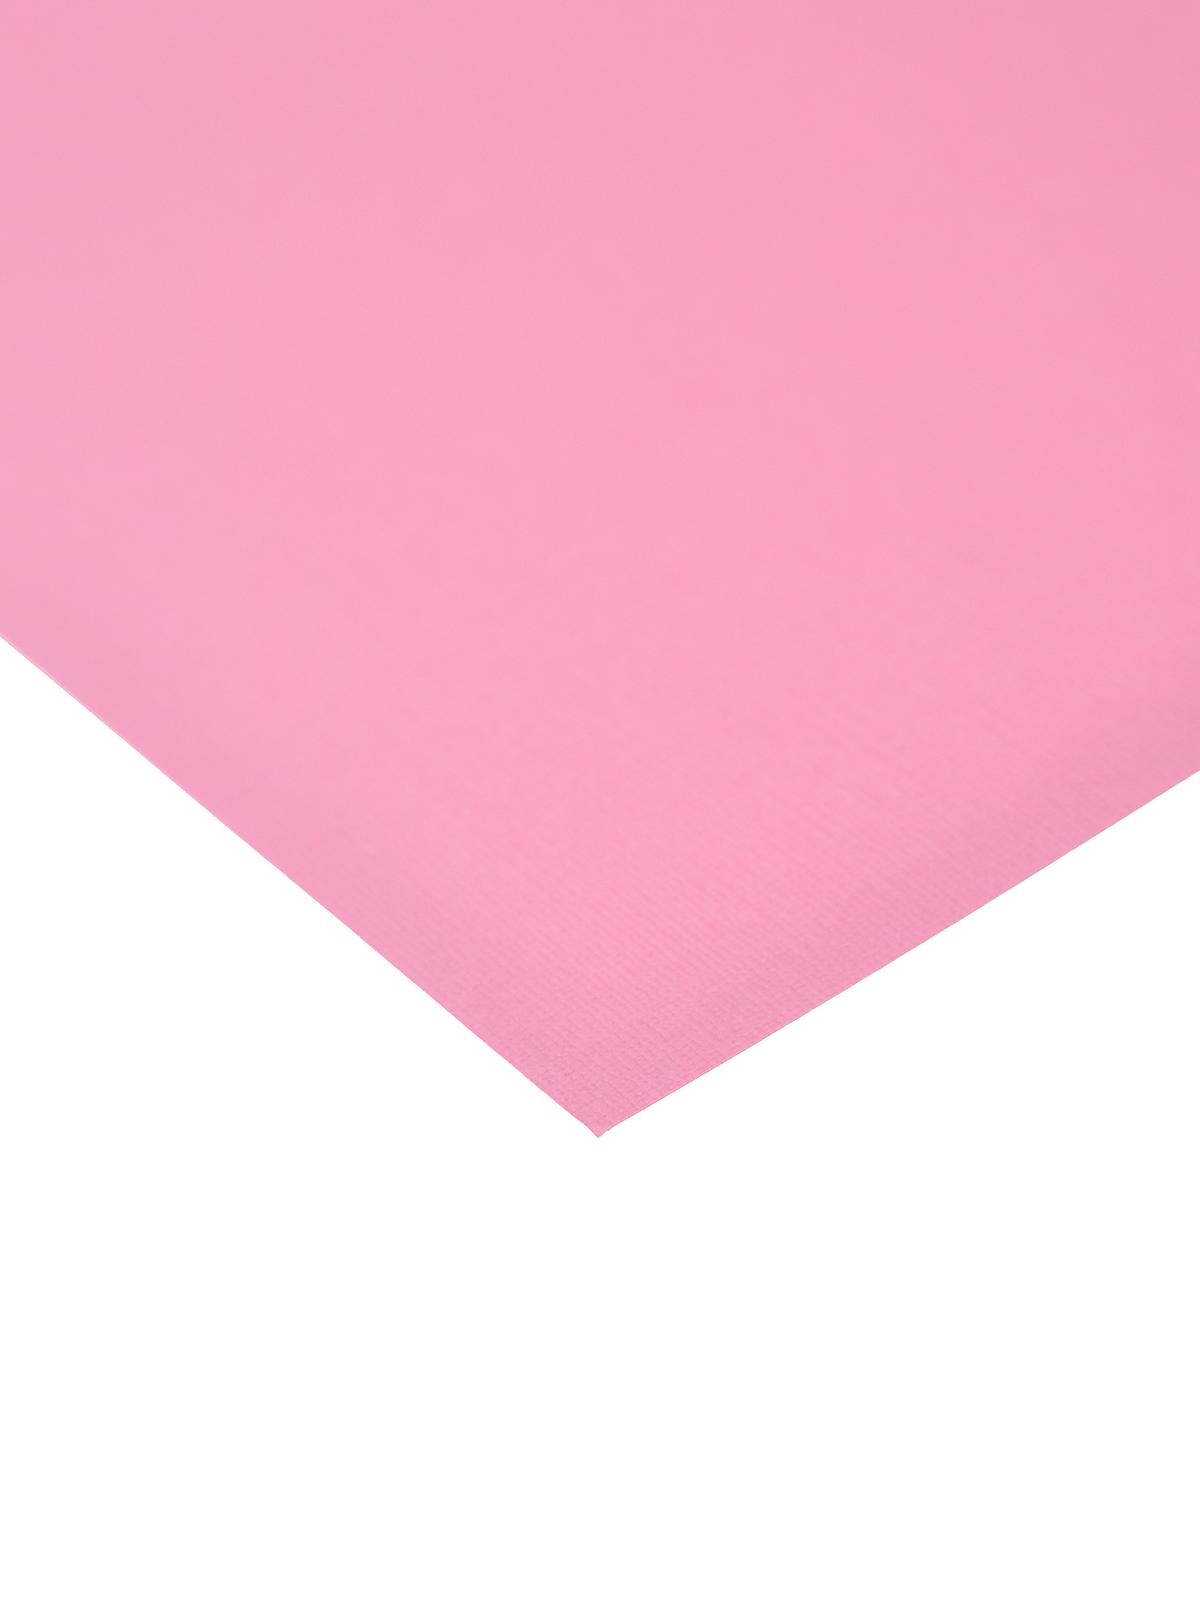 80 Lb. Canvas 8.5 In. X 11 In. Sheet Pink Punch